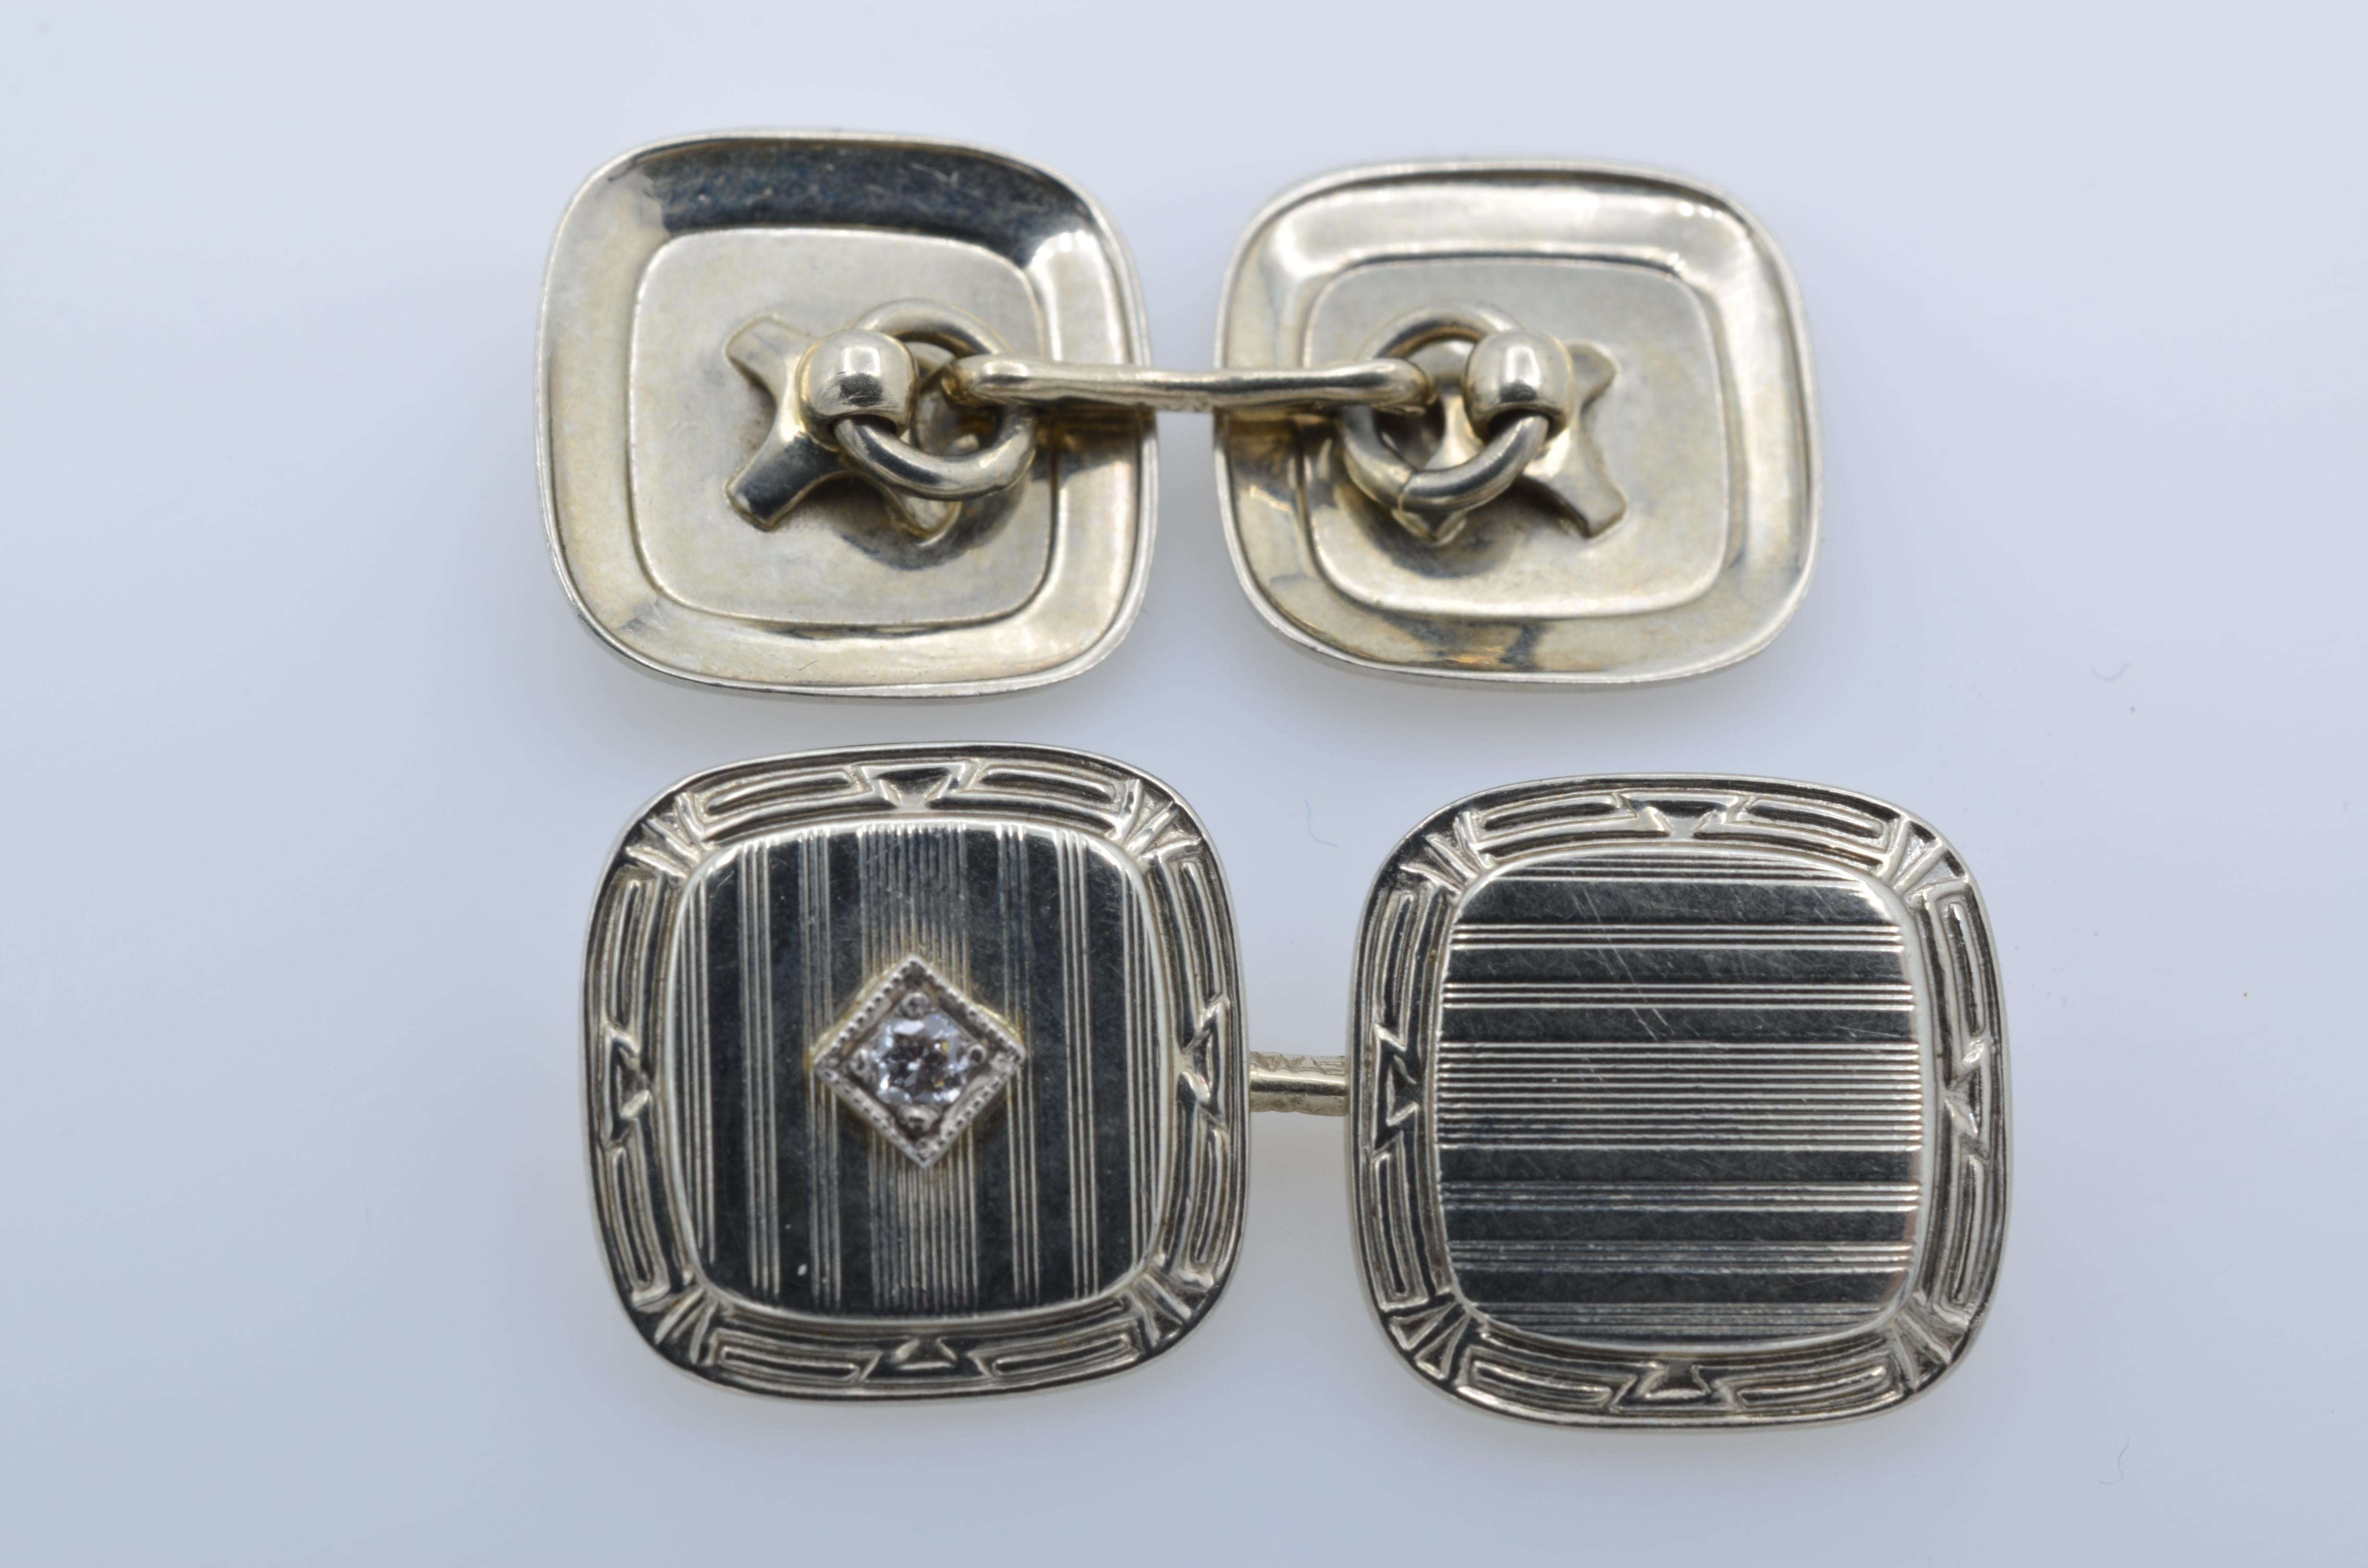 Superb and elegant these cuff links are the perfect gift for the discerning Gent.. The center diamond set in 14k adds a bit of sparkle and dazzle. The Roaring 1920's were an exciting renaissance. These are a tribute to that wonderful time.